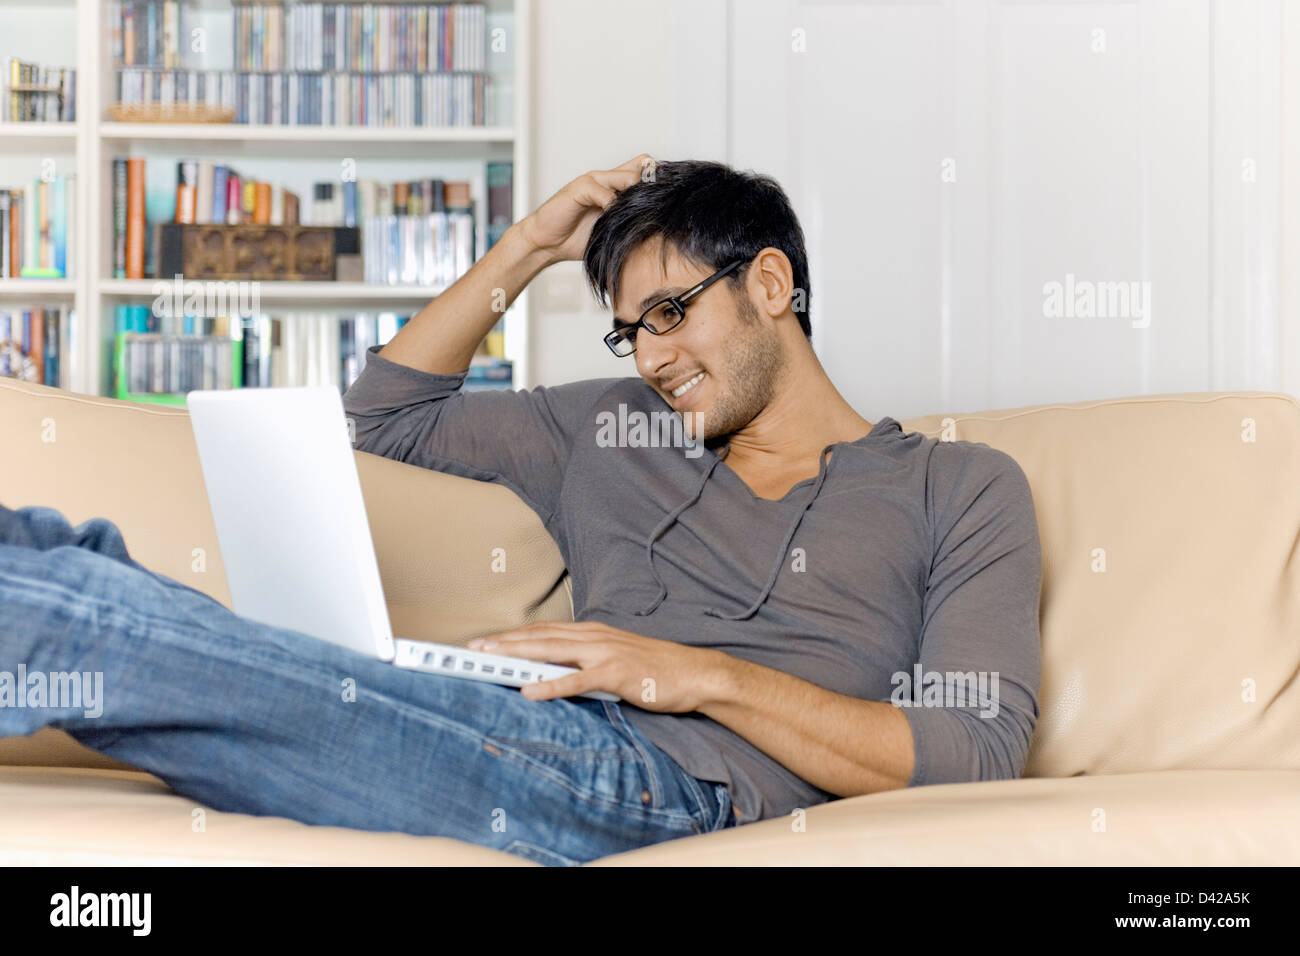 A man very comfortable surfing the internet using a laptop. Stock Photo